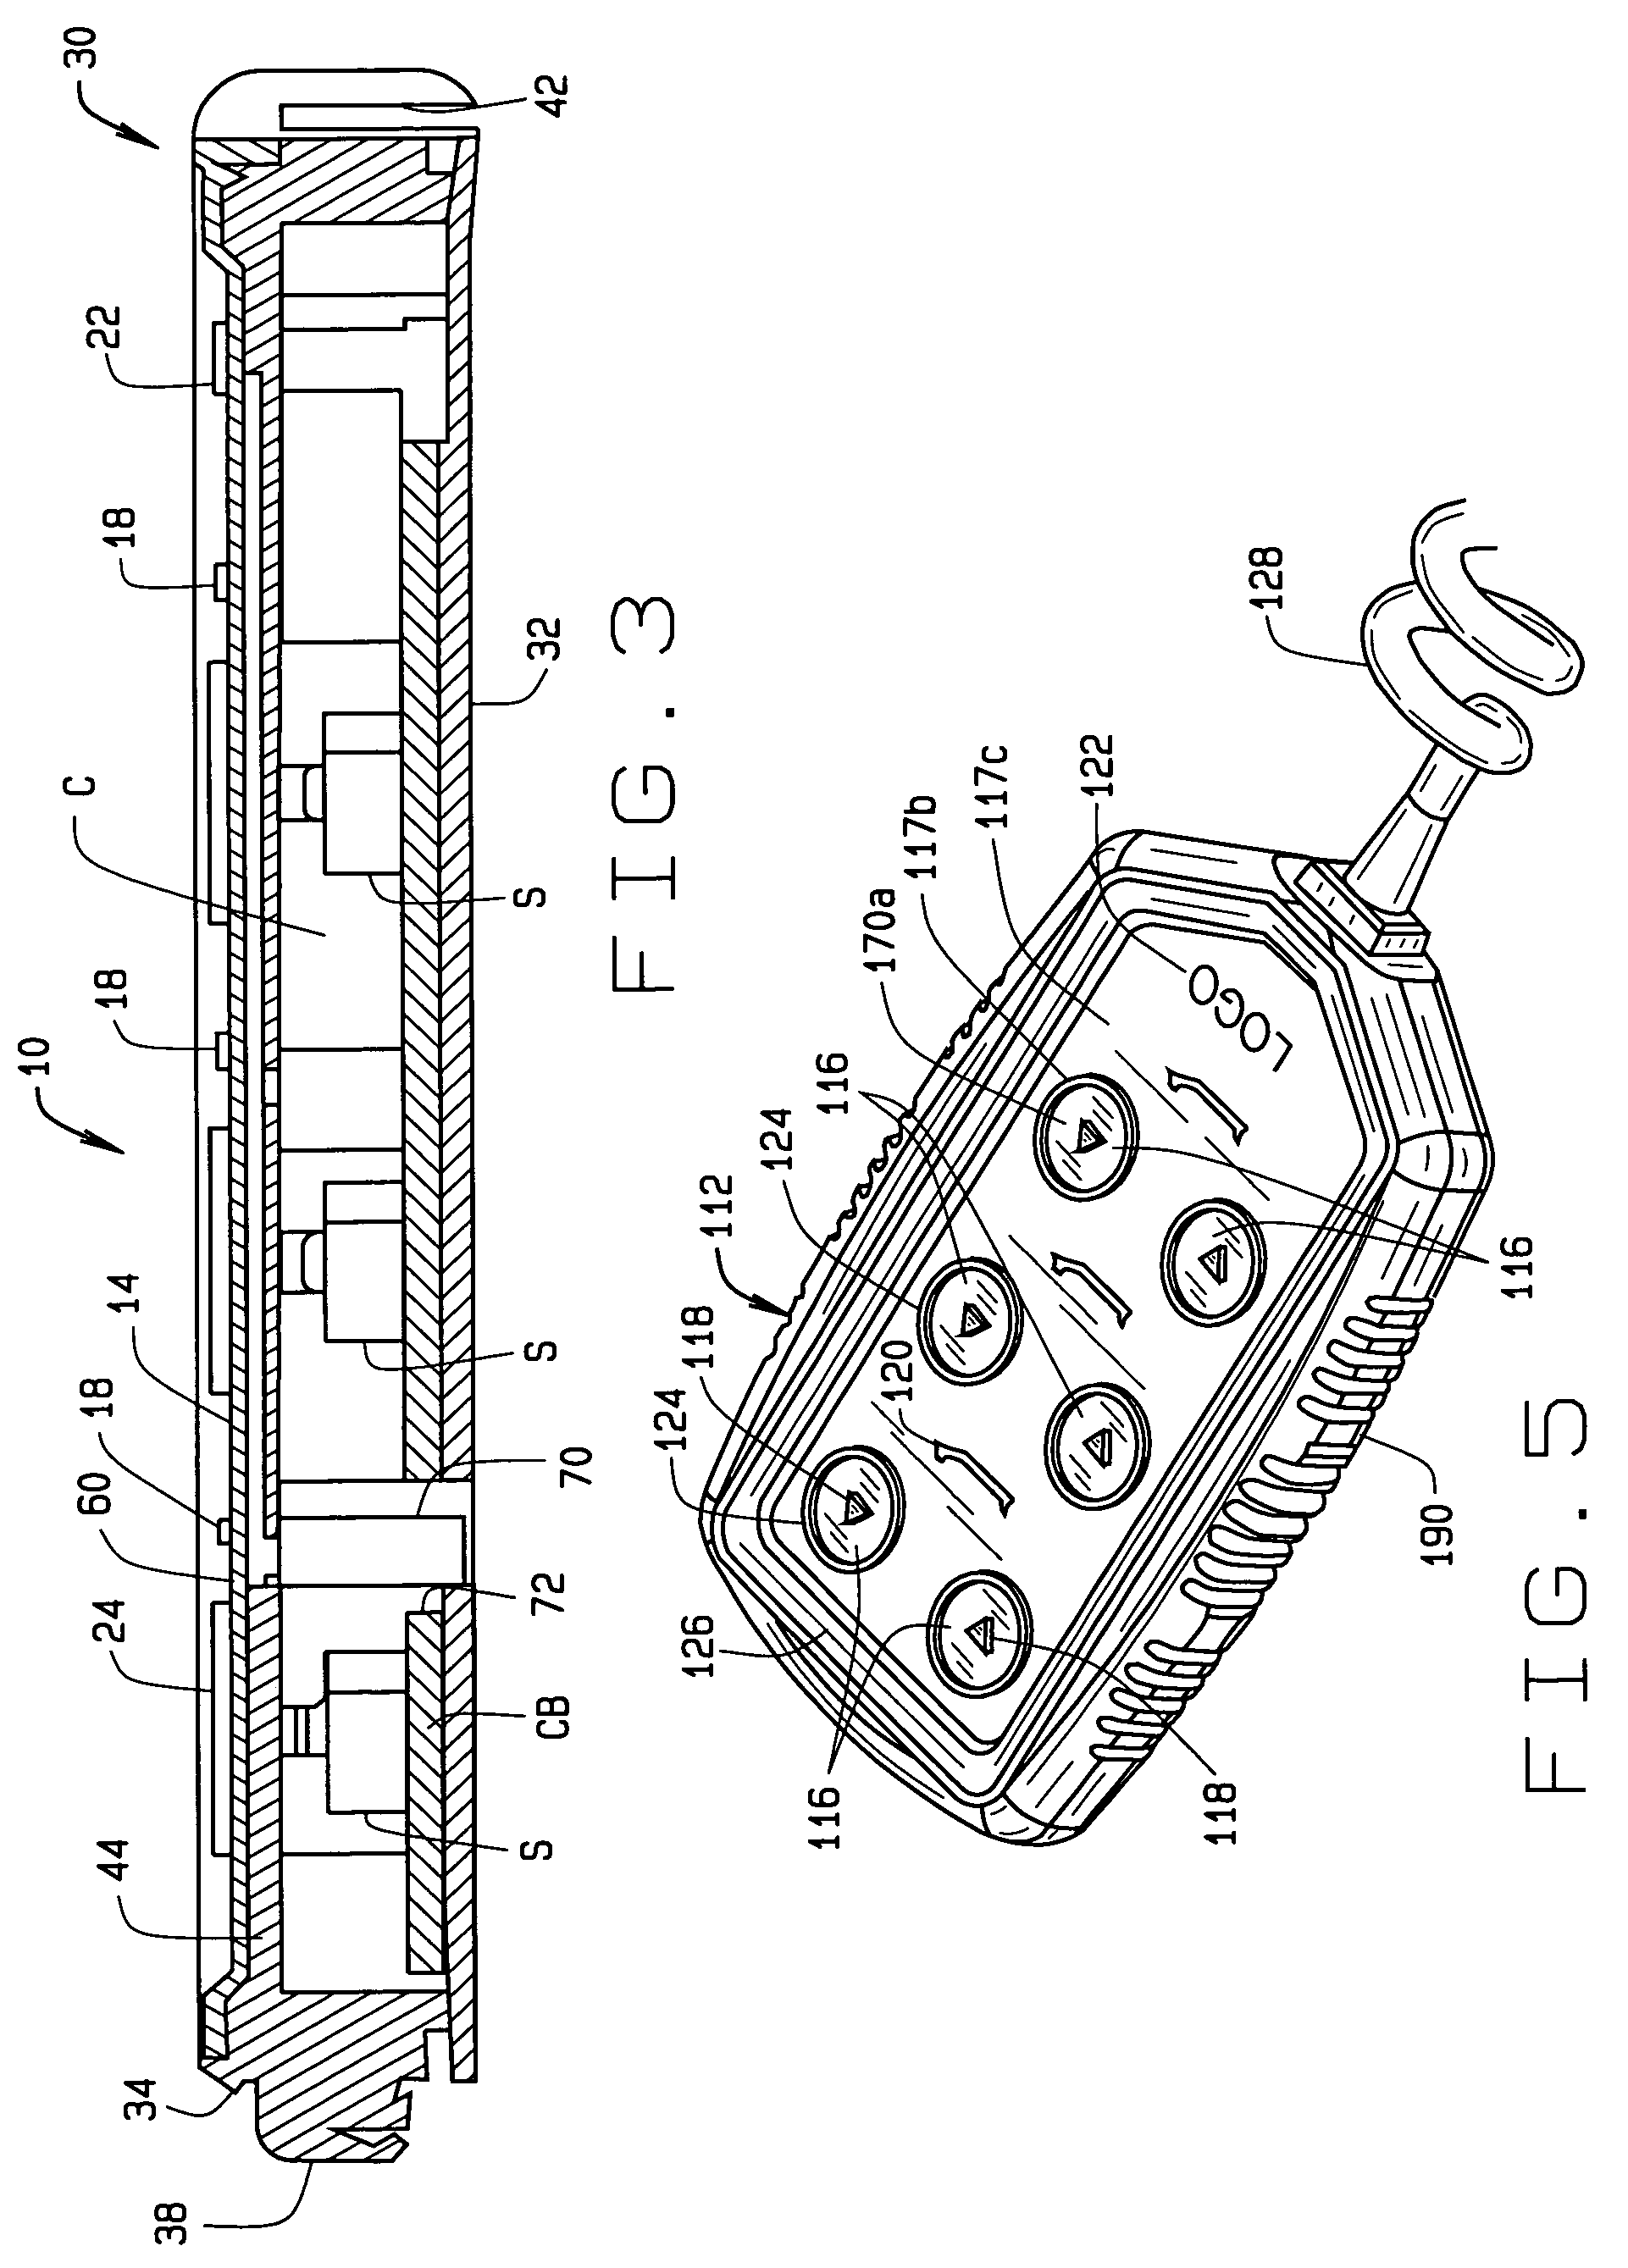 Control housing and method of manufacturing same